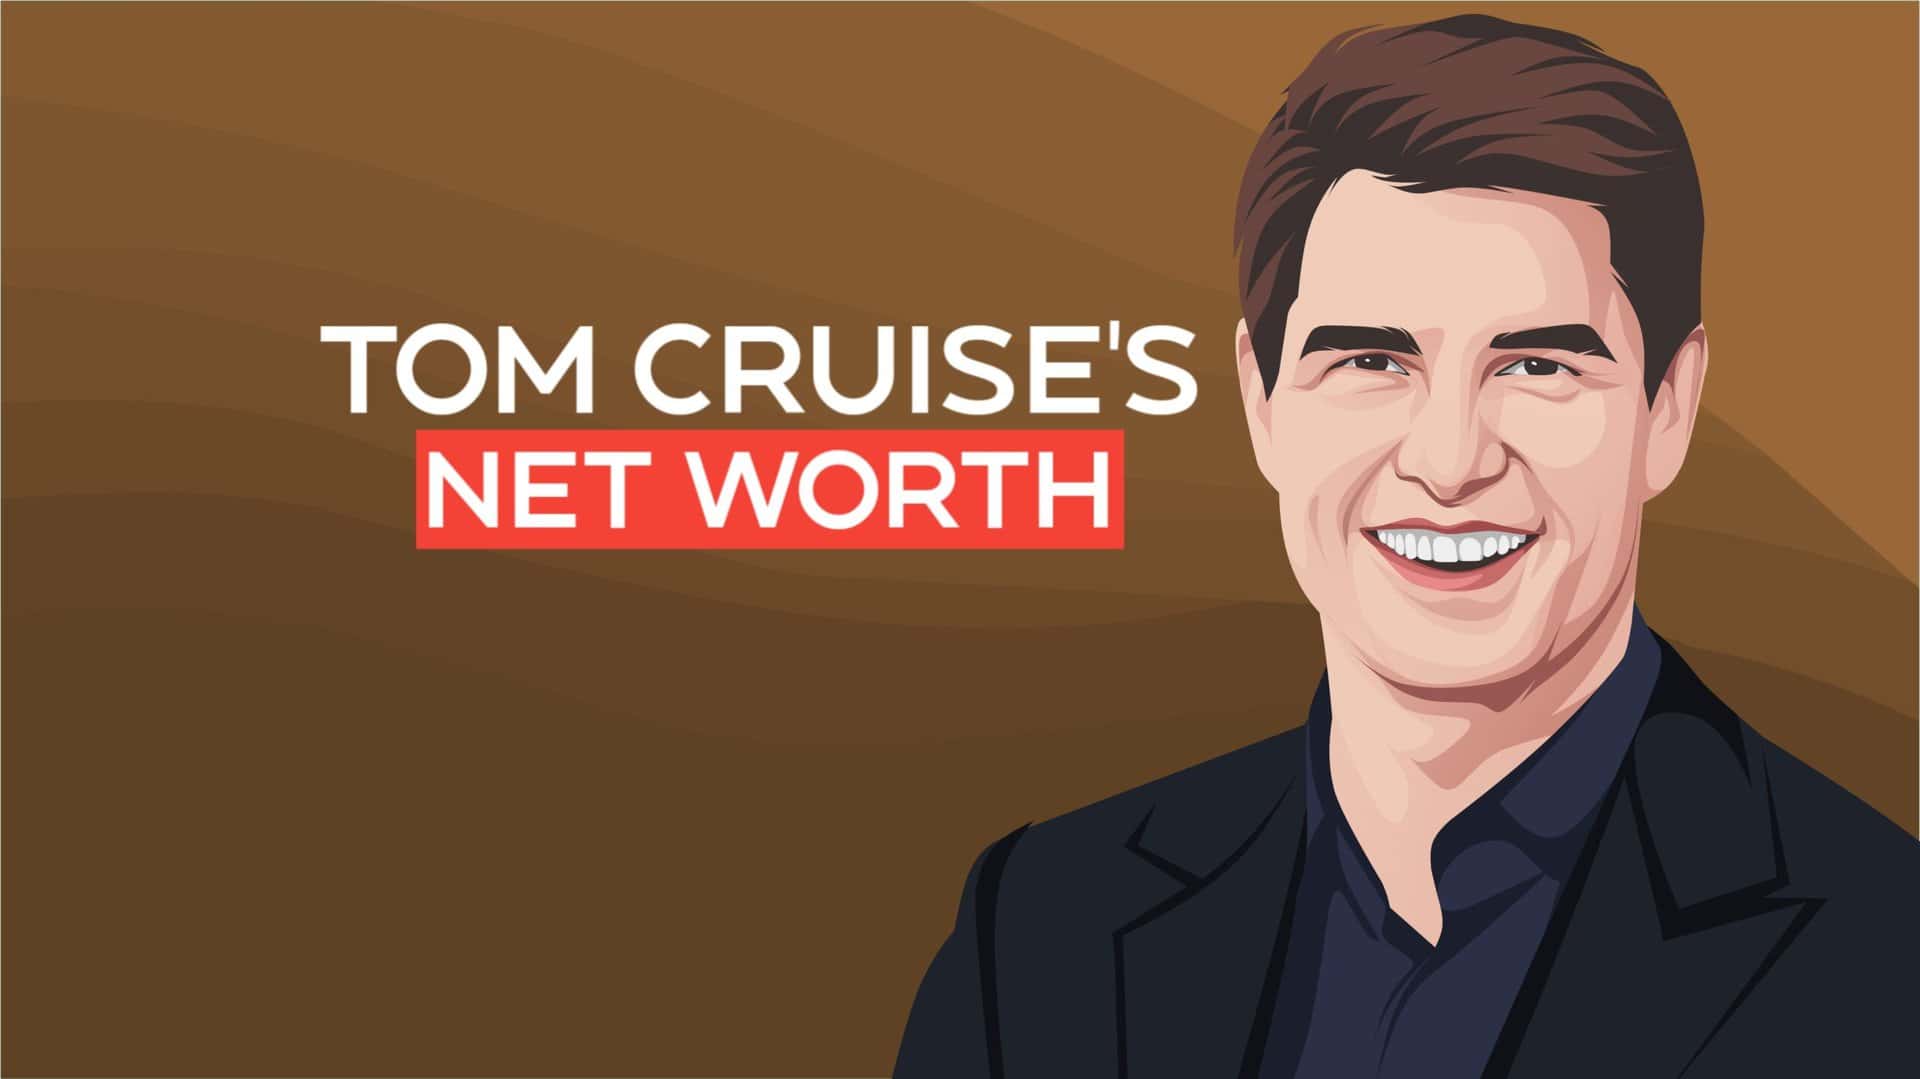 Tom Cruise's Net Worth and Story